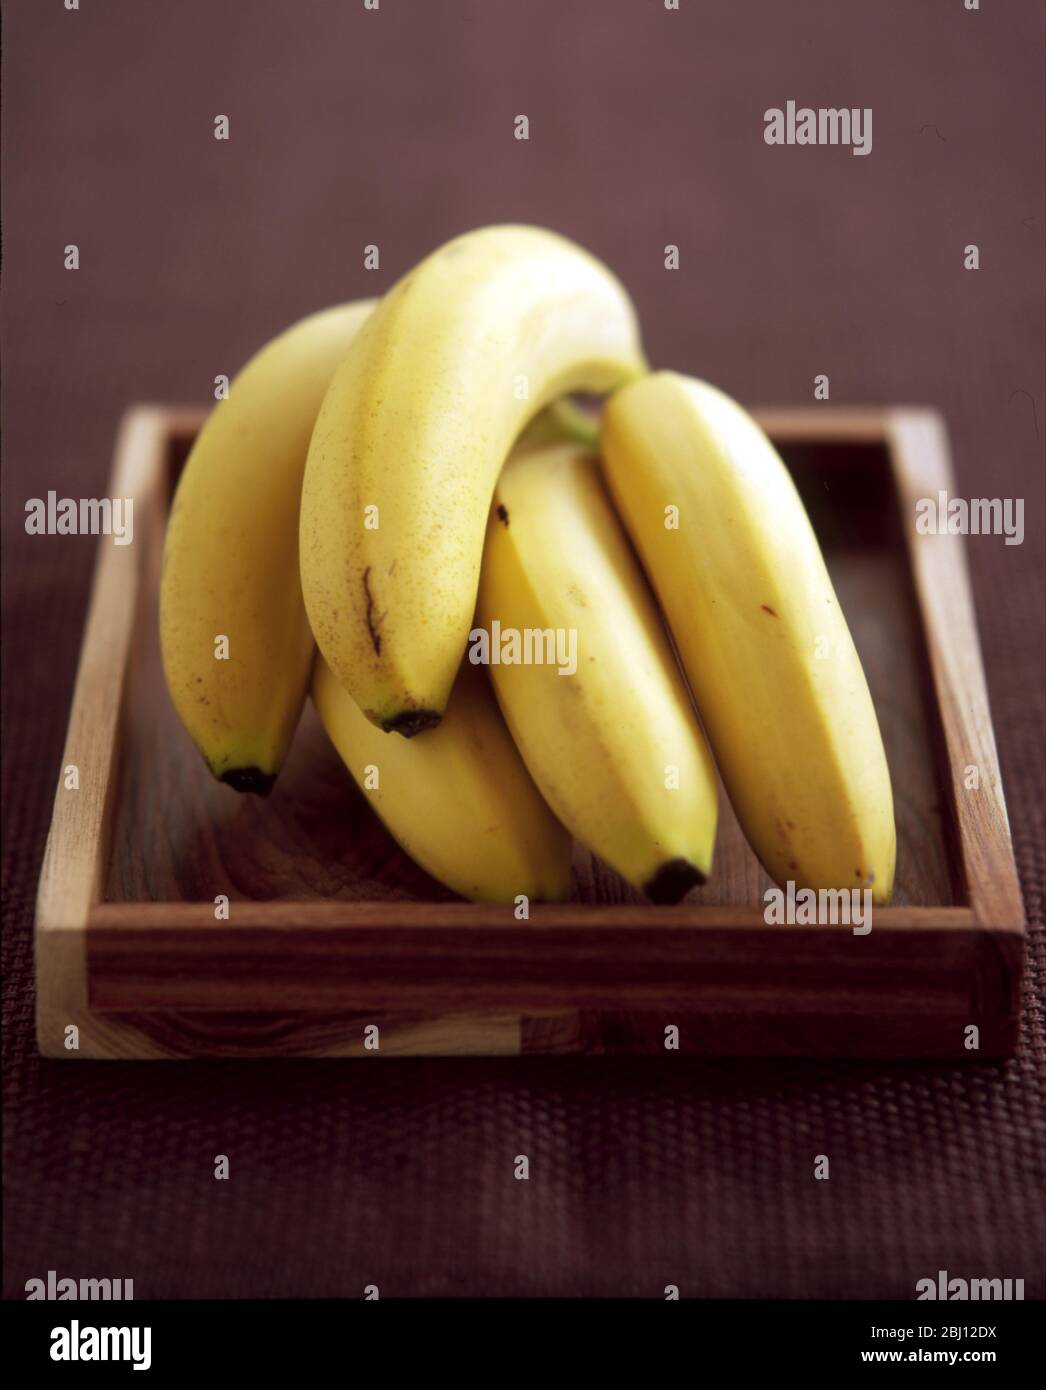 Bunch of bananas on wooden tray - Stock Photo